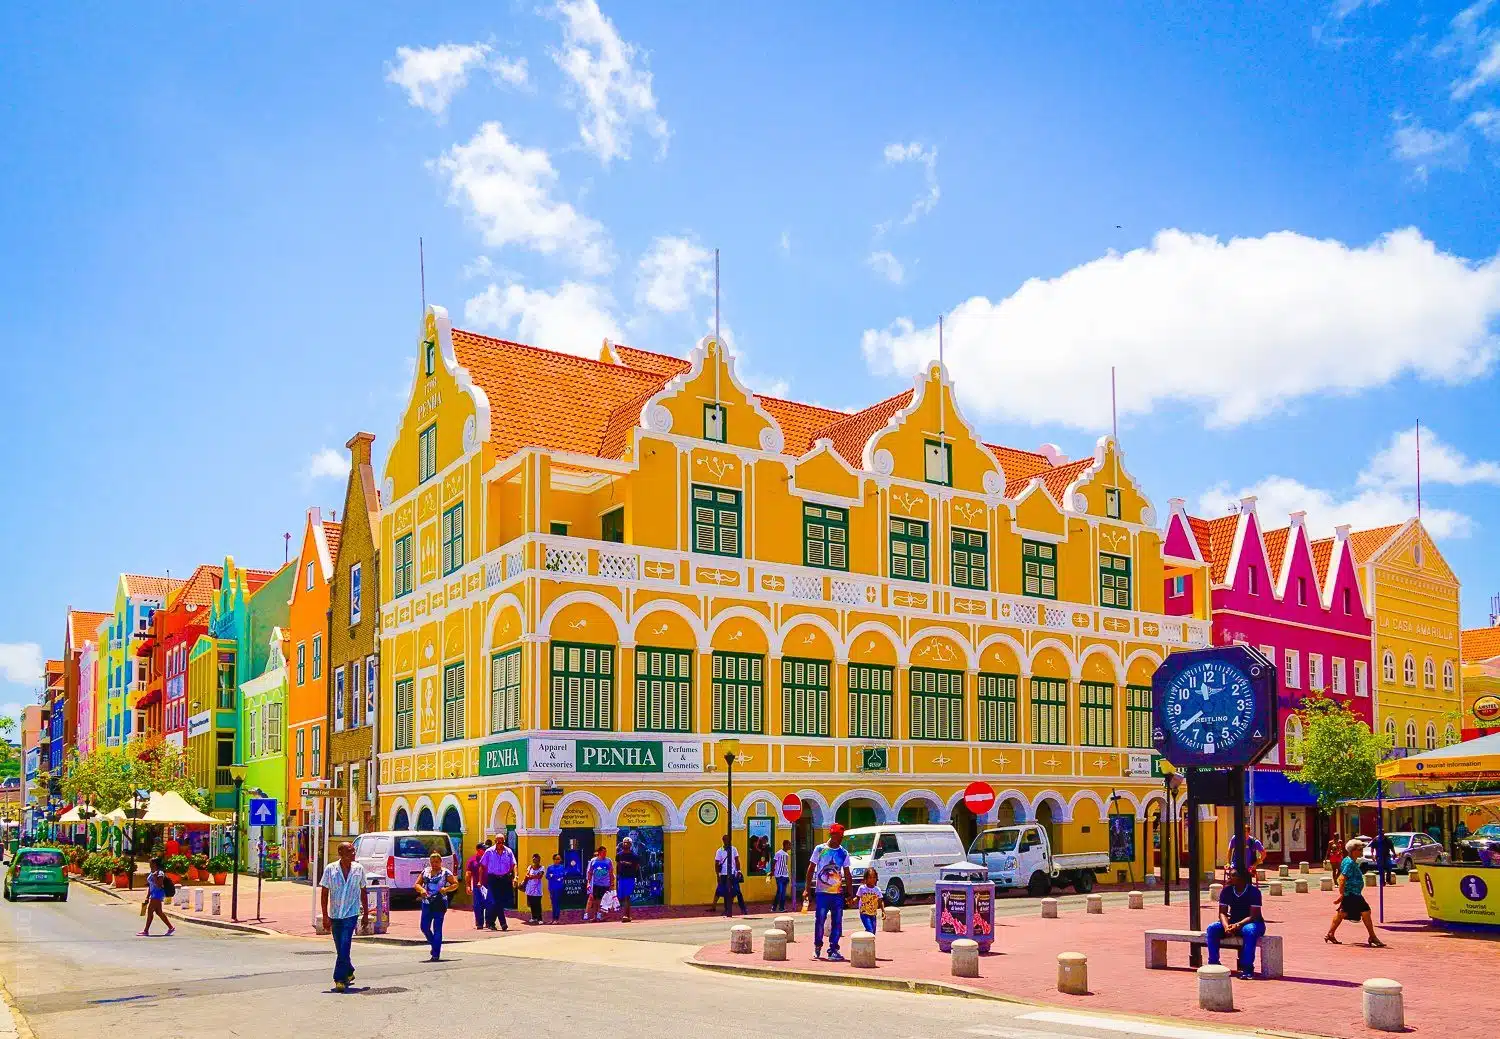 The famous Penha building in Willemstad.